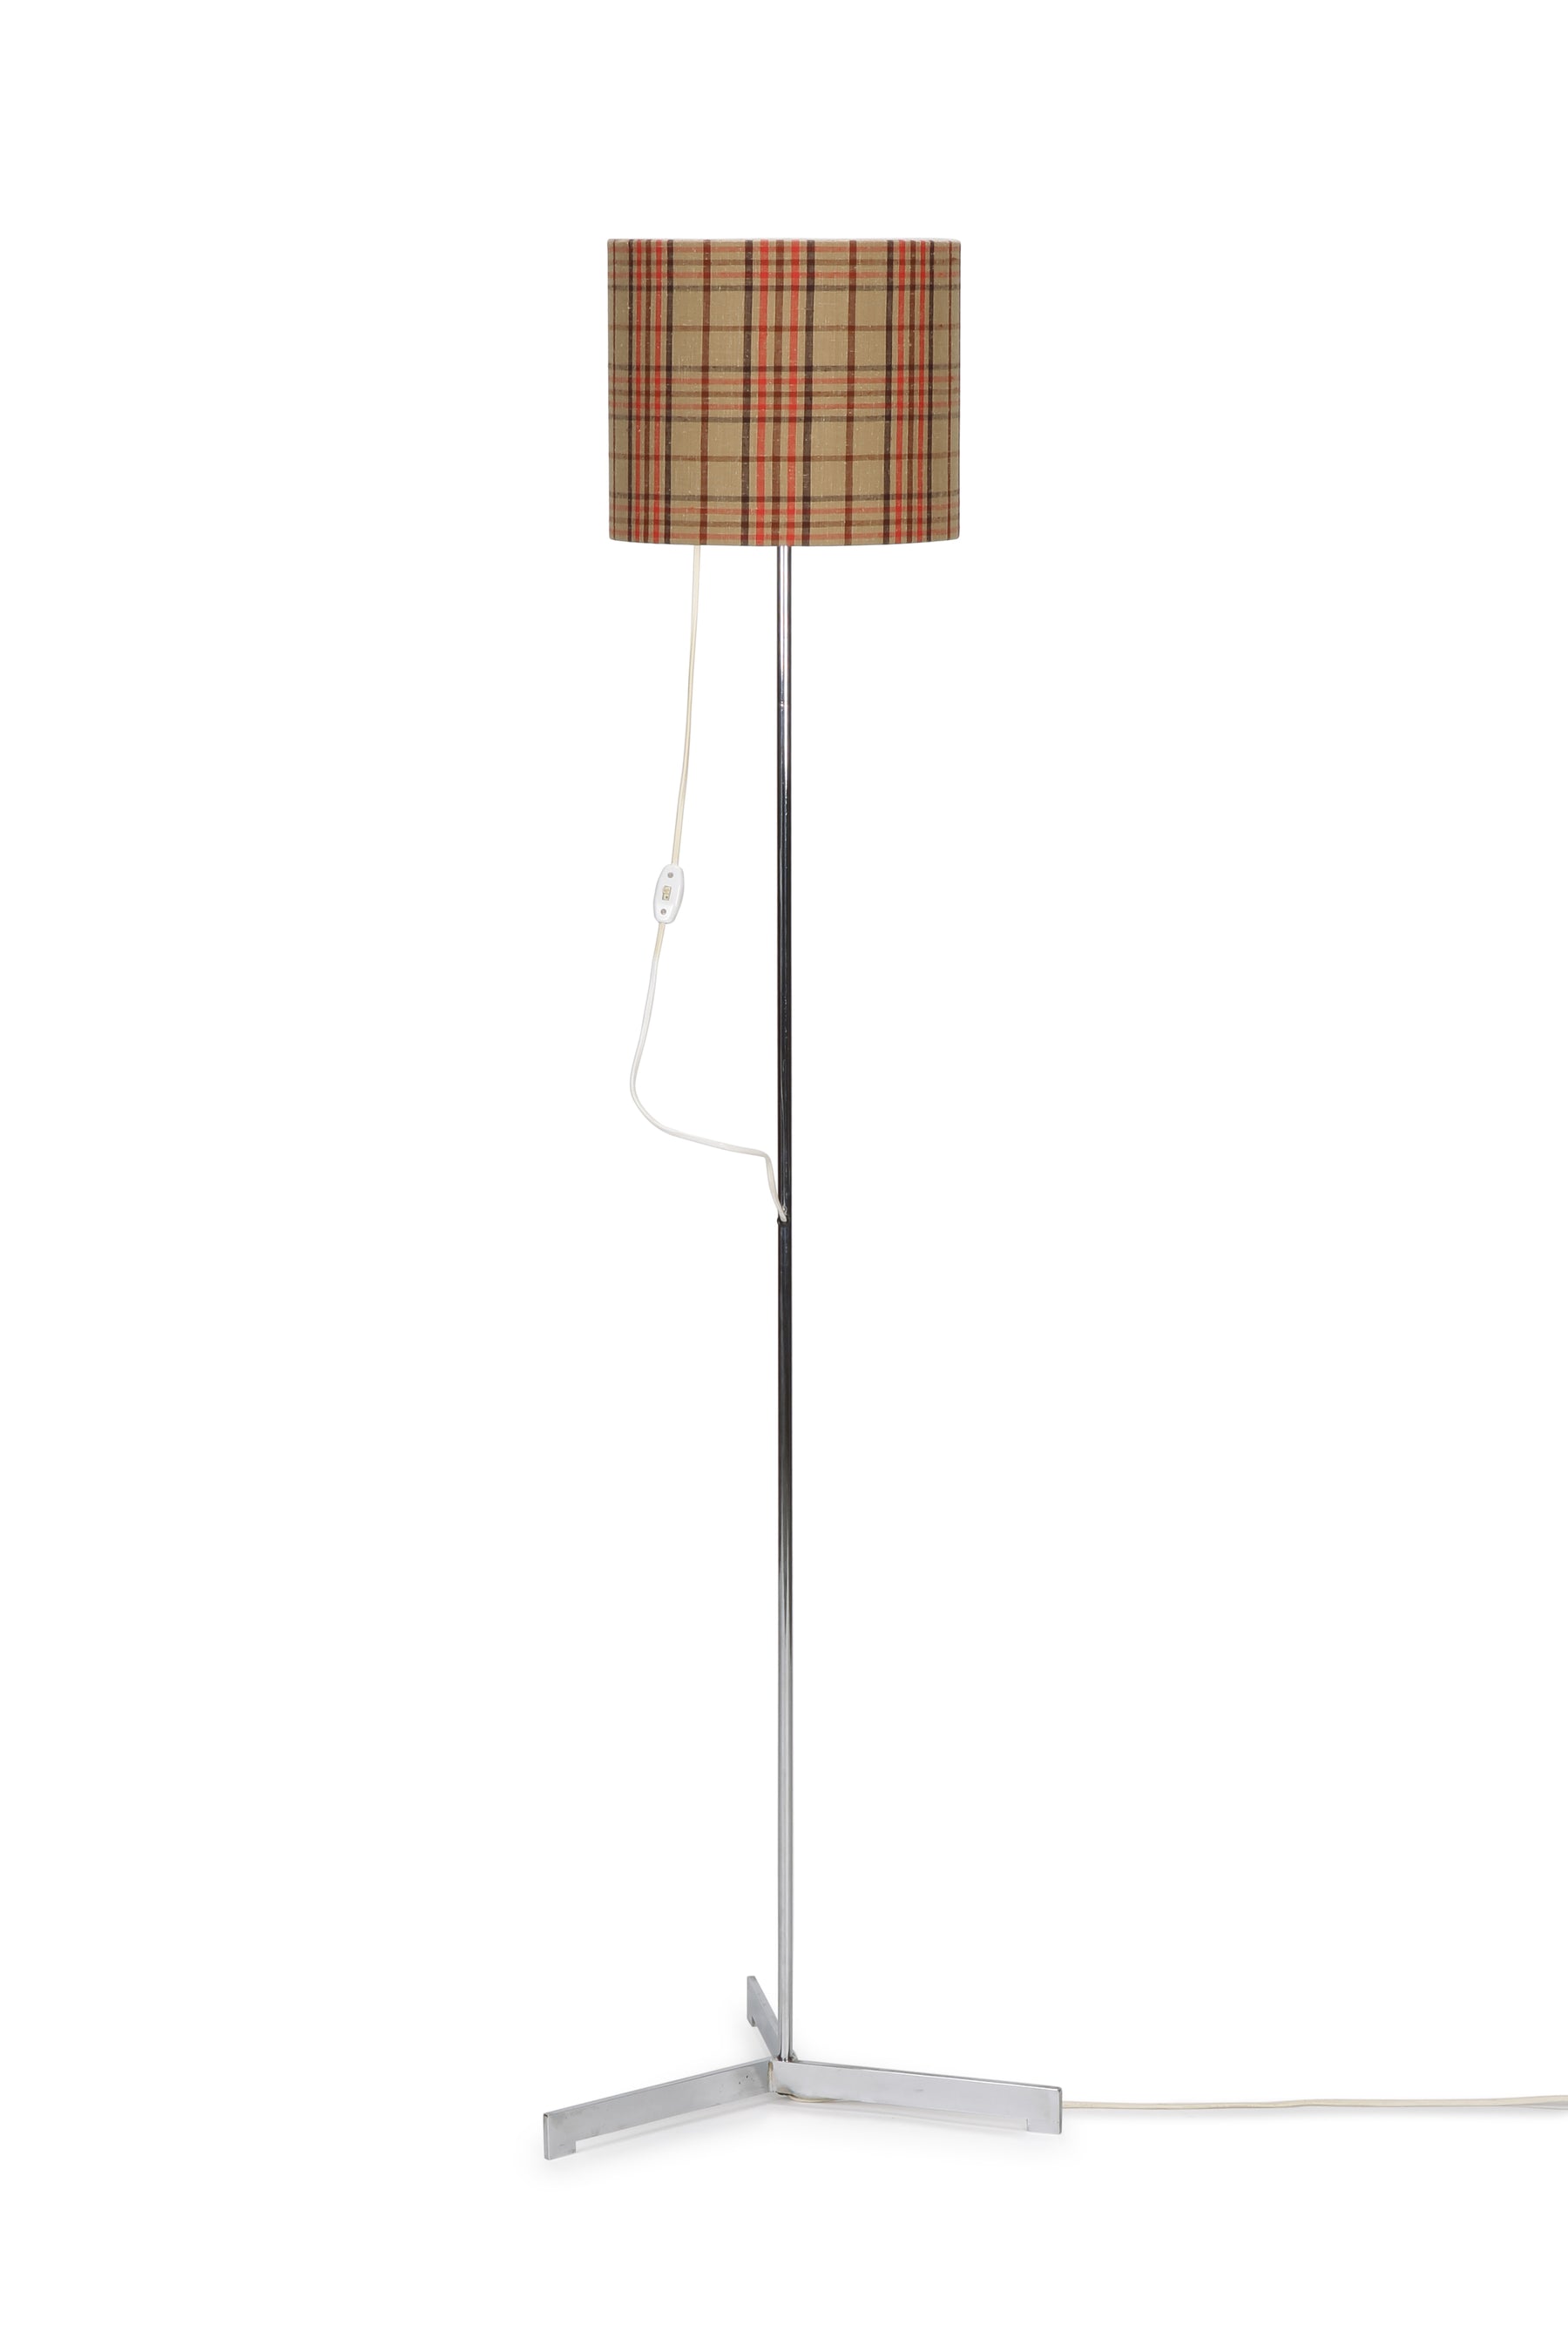 Adjustable lamp with checked Pattern lampshade, 60s